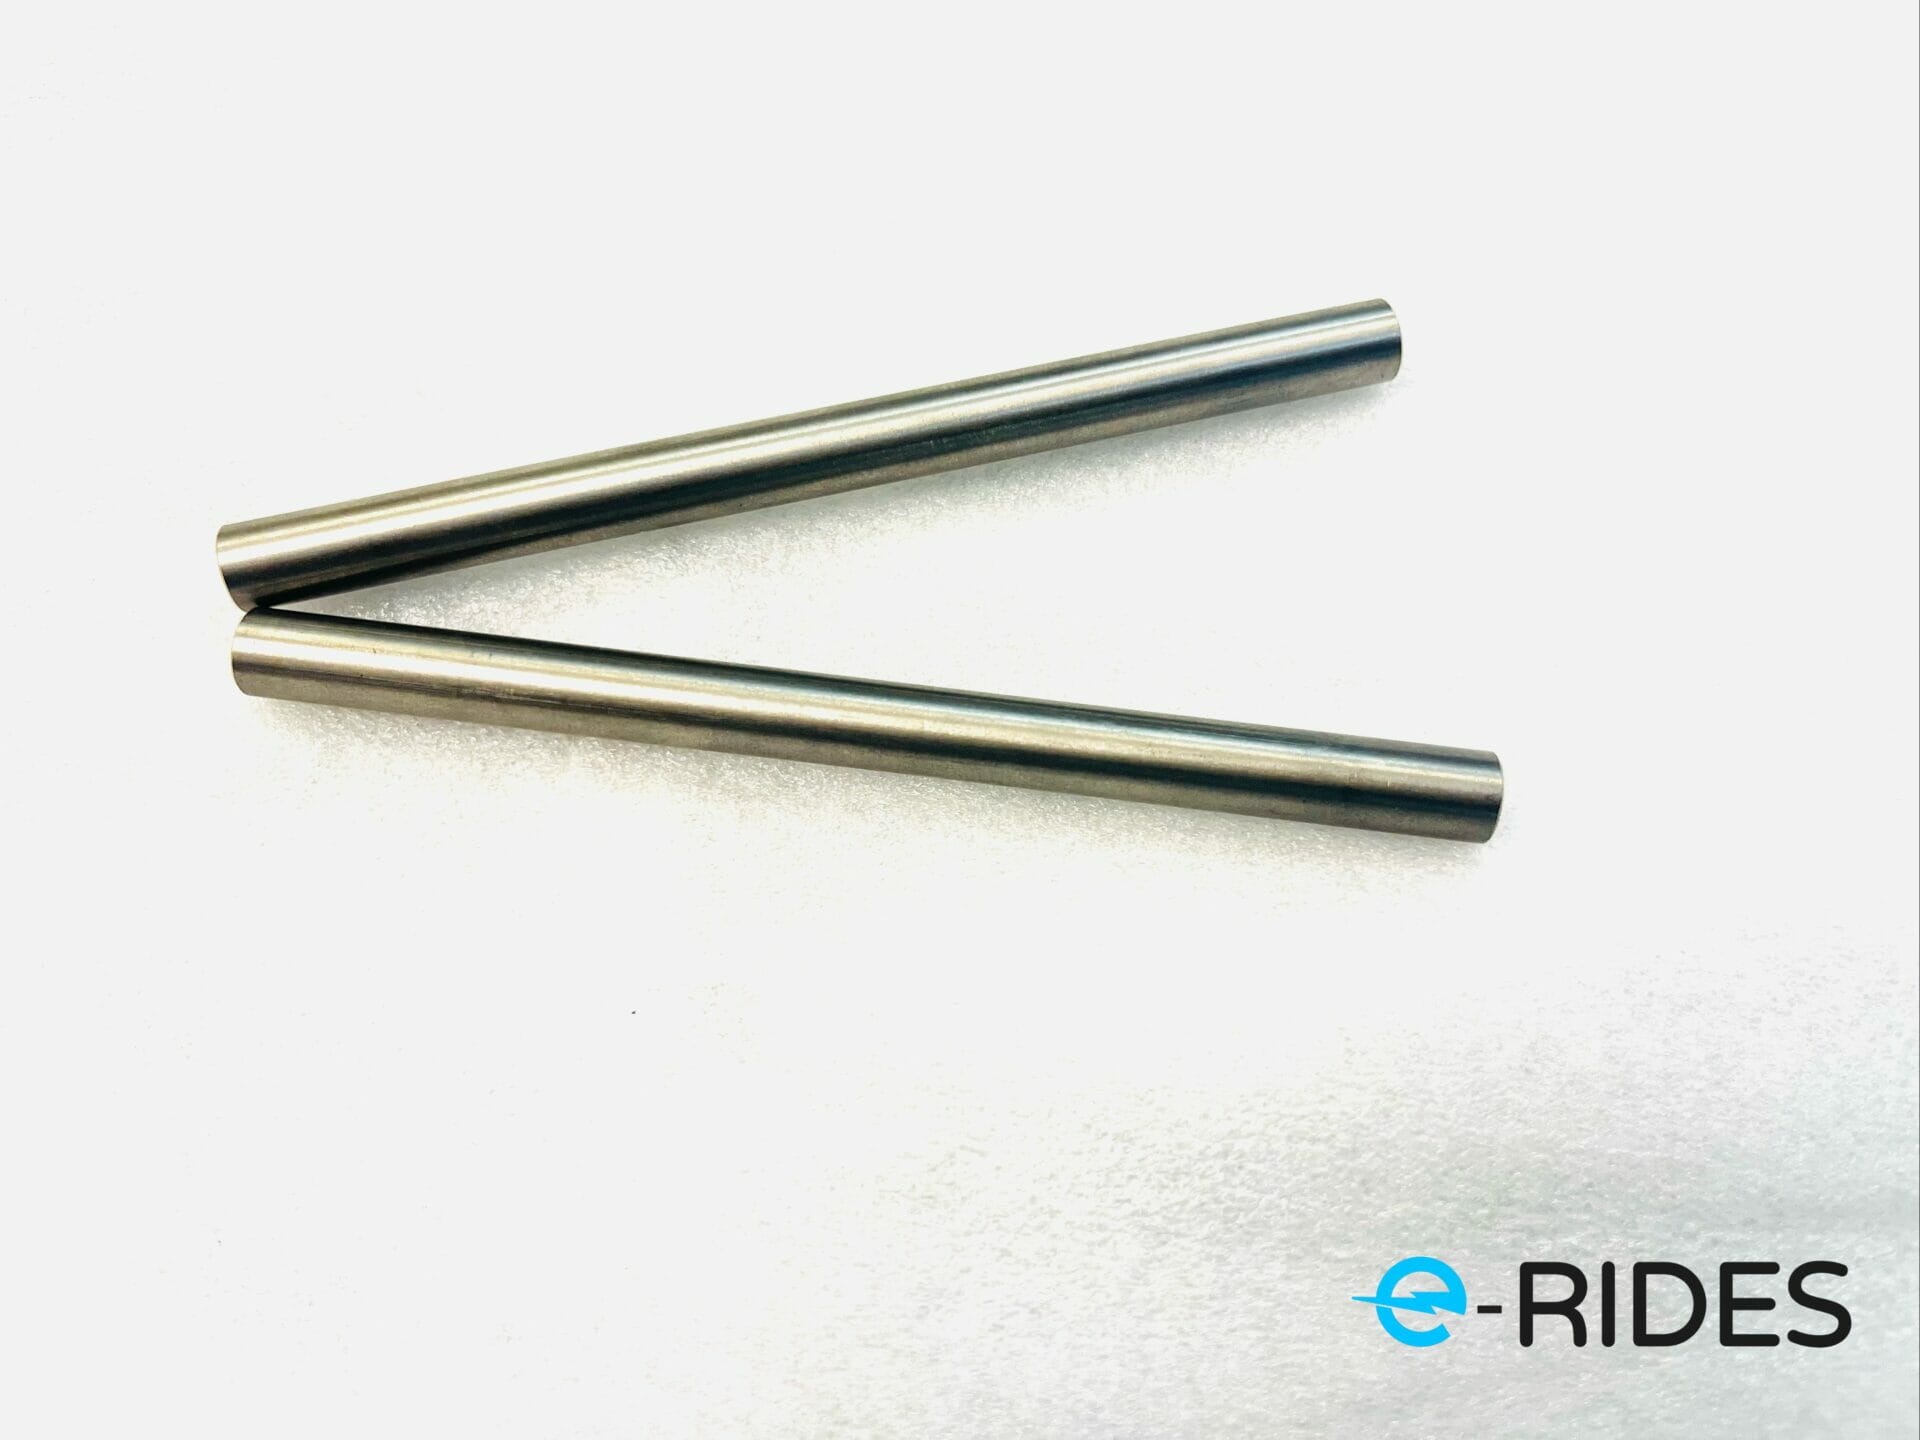 Titanium Rods for Electric Unicycle Pedals